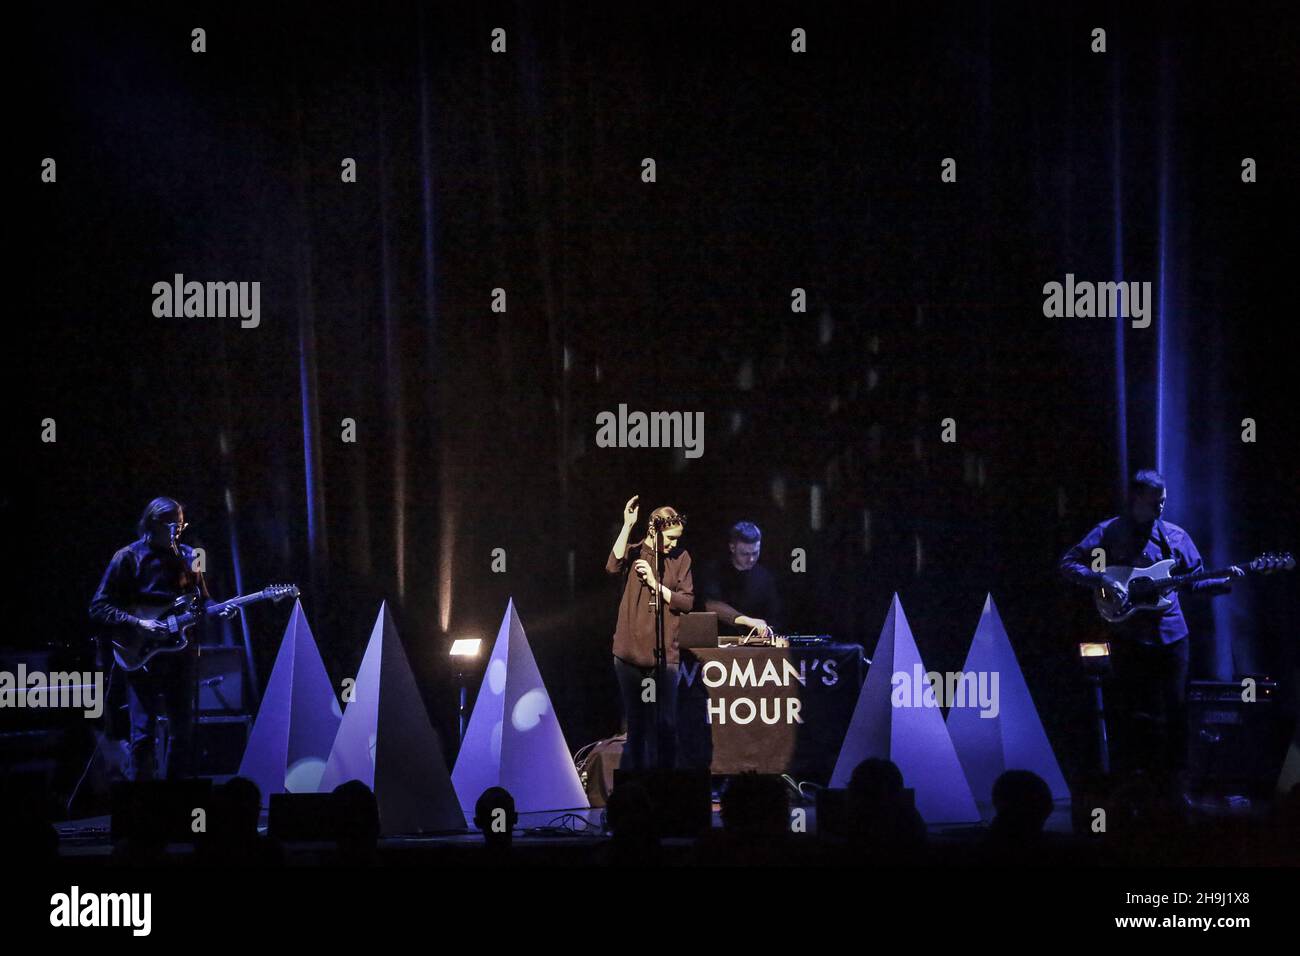 Woman's Hour perform at a sold-out Purcell Room in London Stock Photo